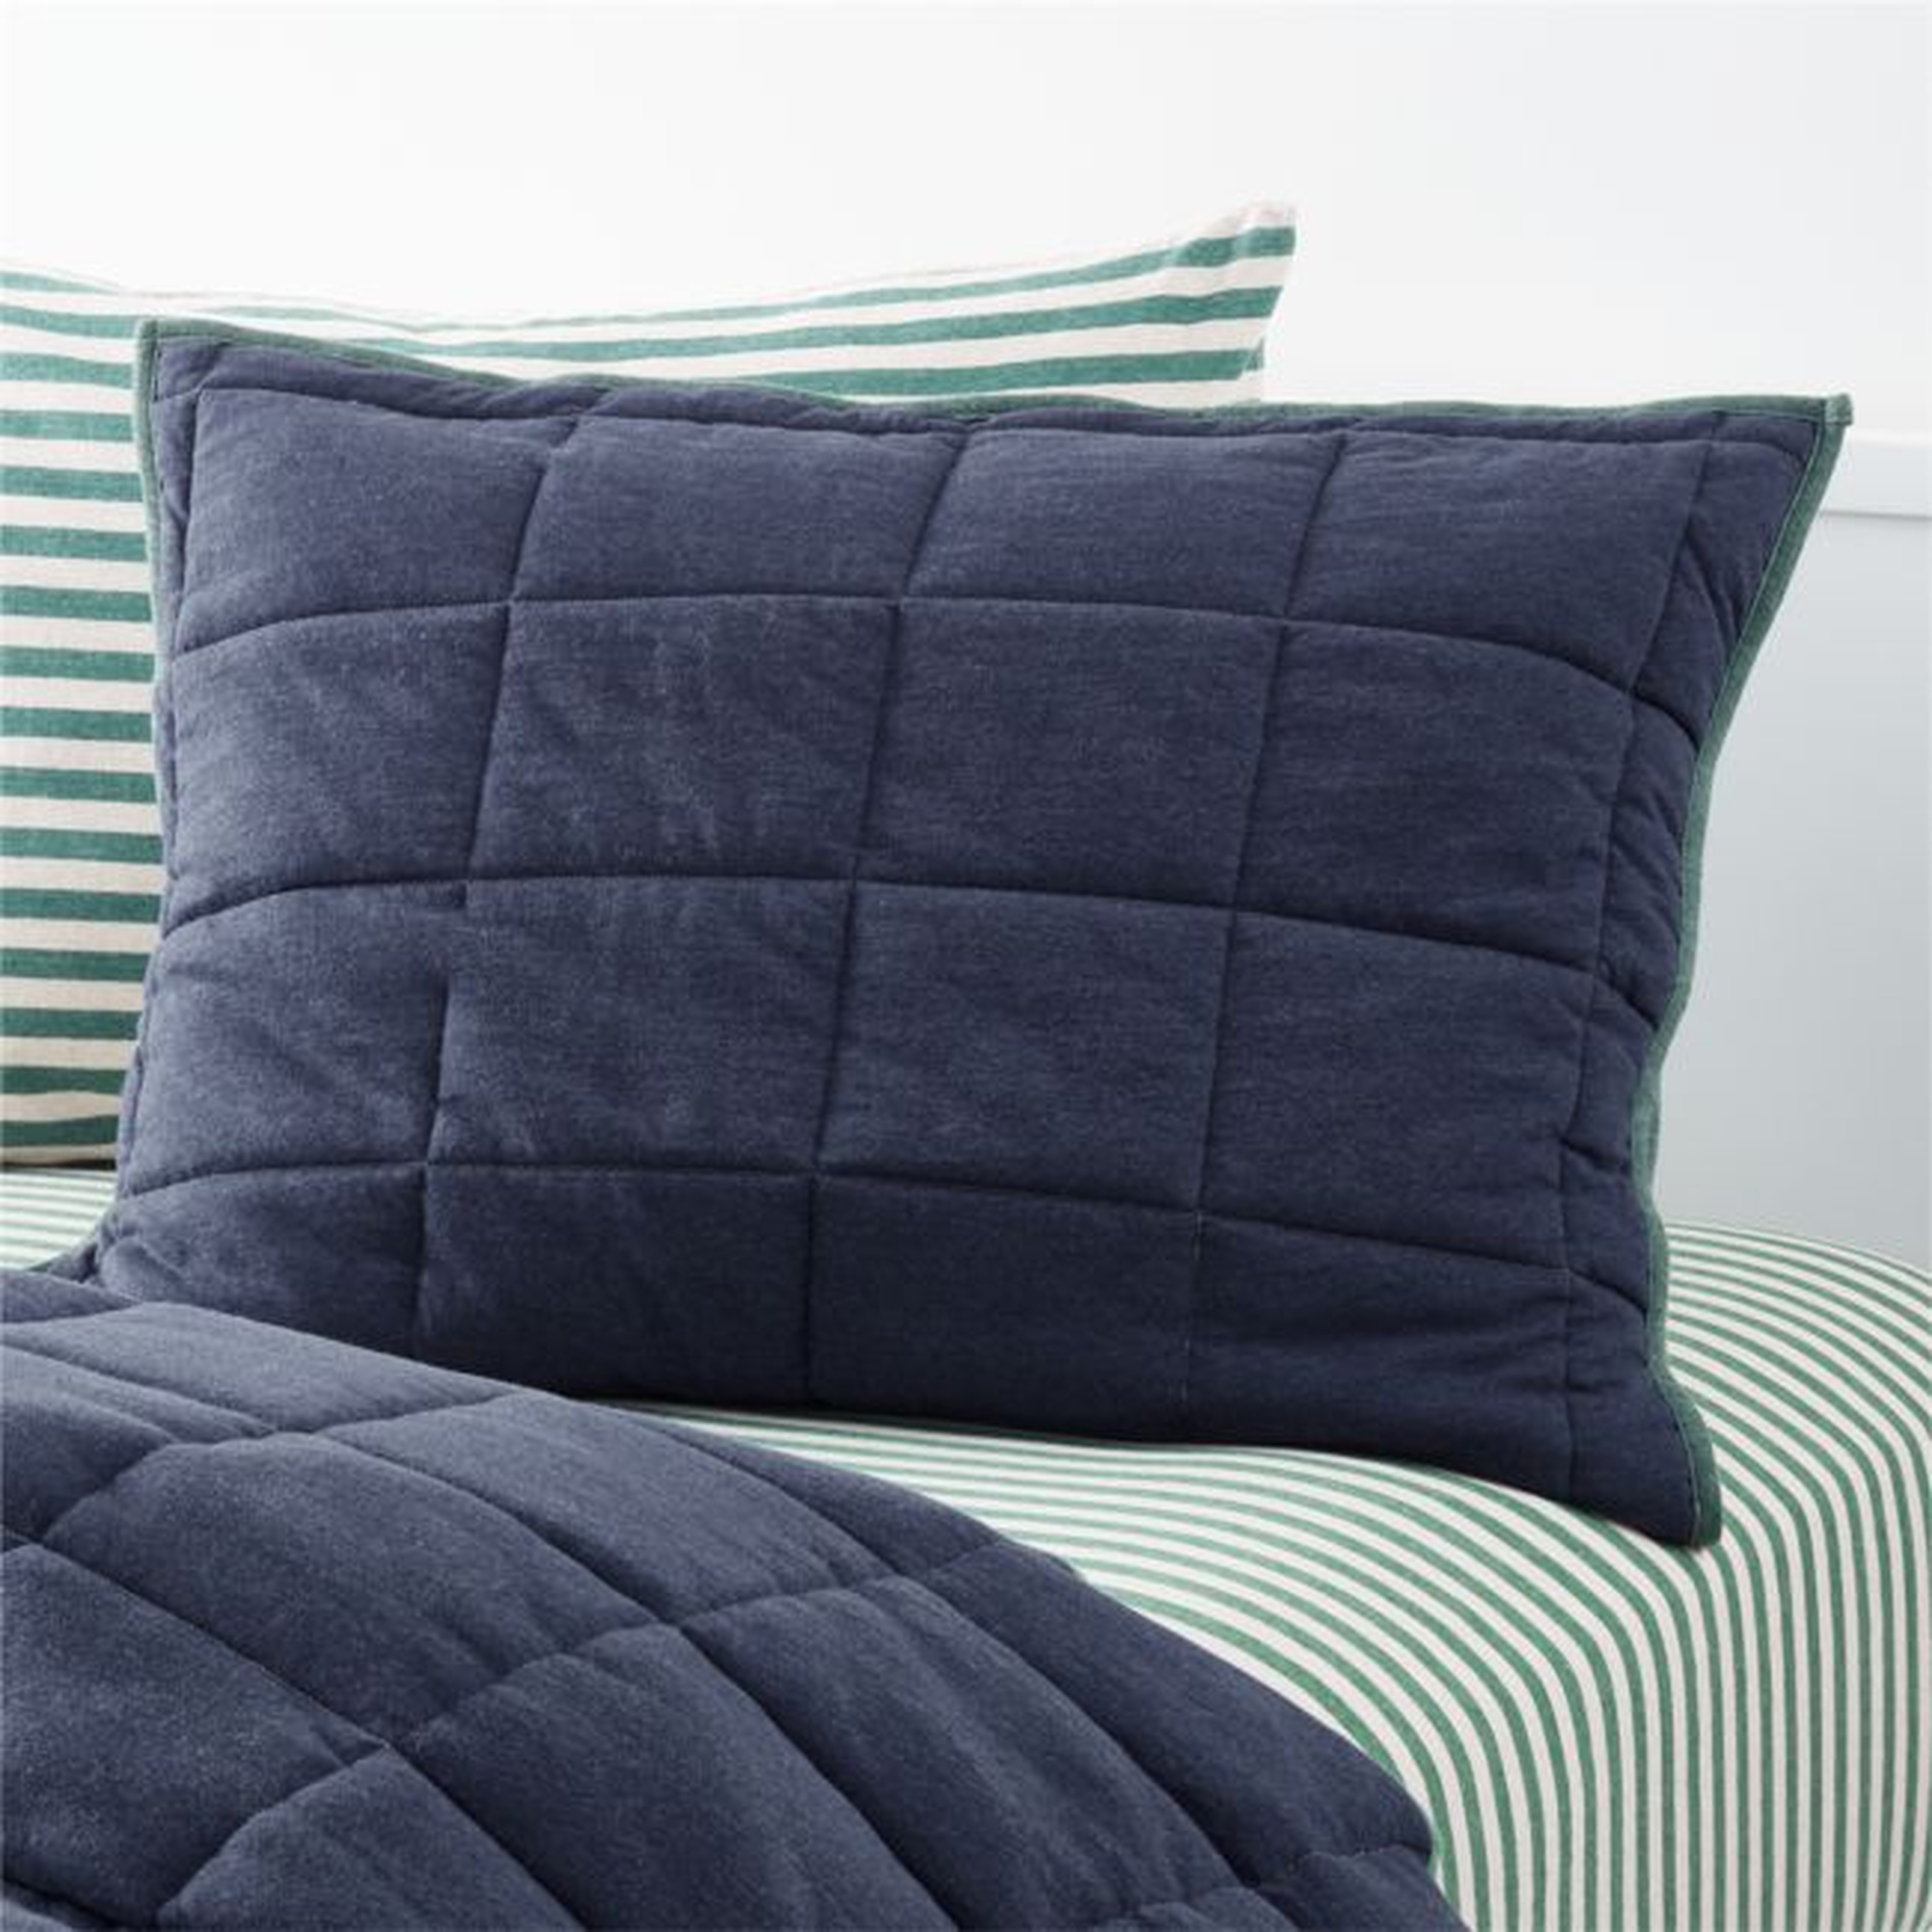 Heathered Jersey Reversible Navy Sham - Crate and Barrel